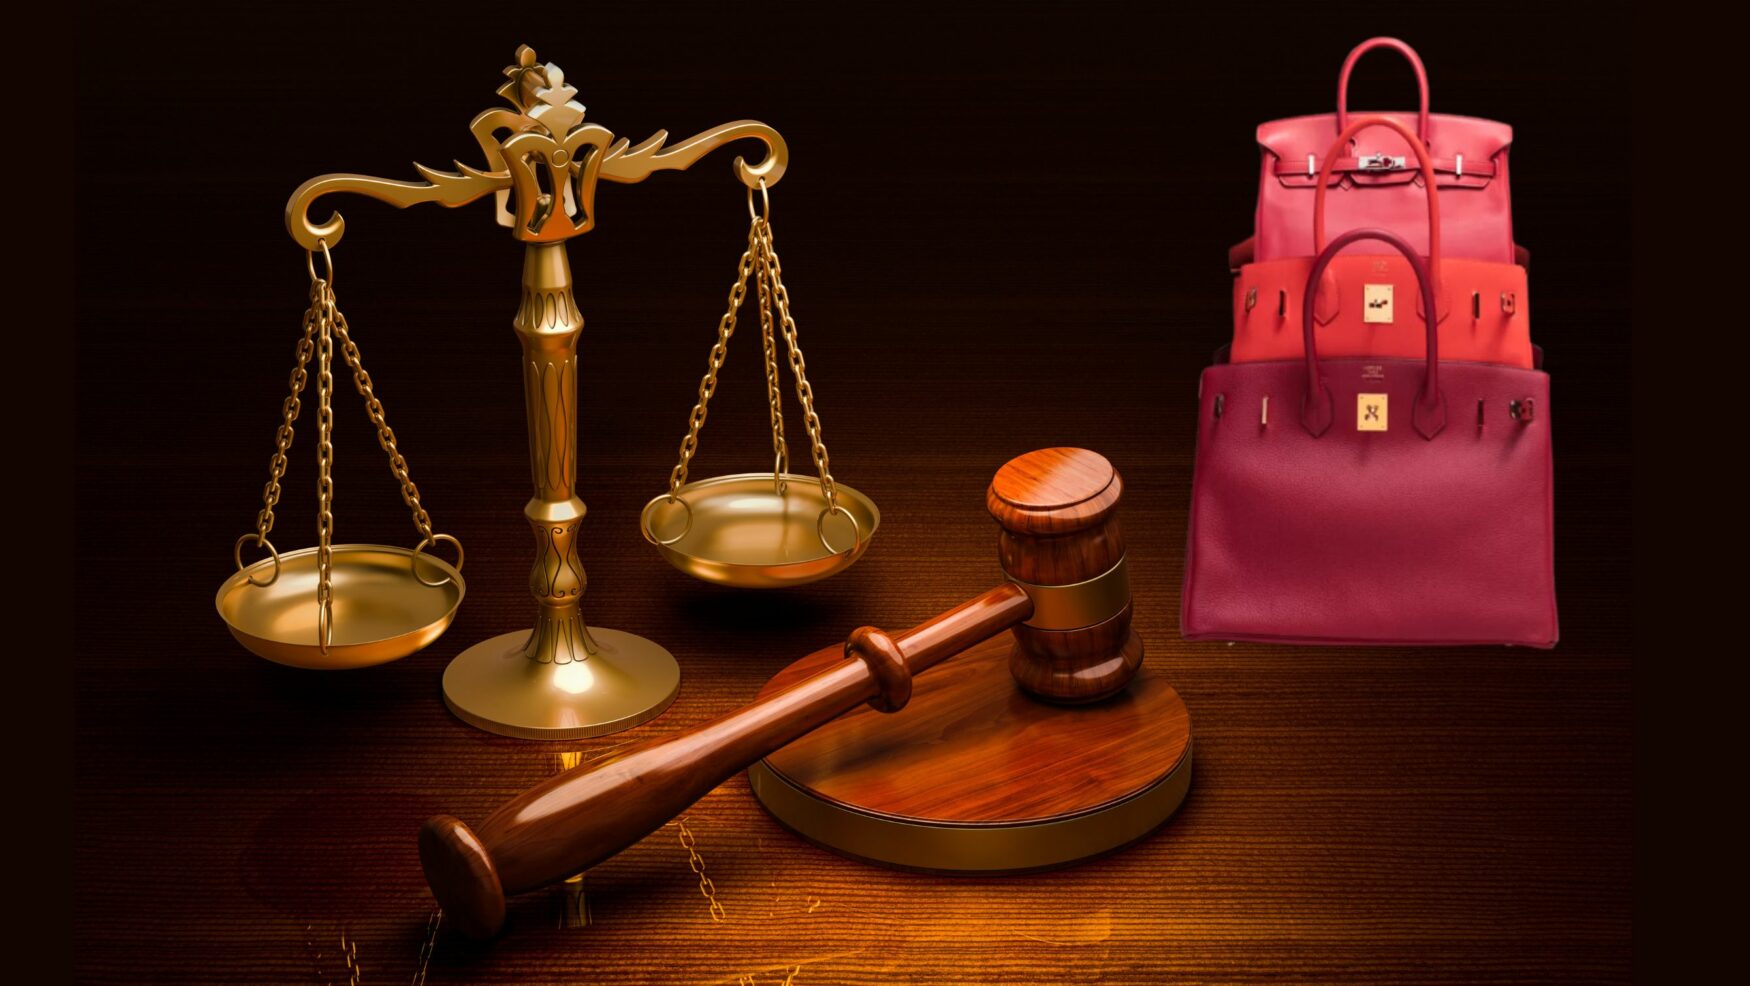 Tying to buy: how the Hermès handbag lawsuit could affect the watch industry